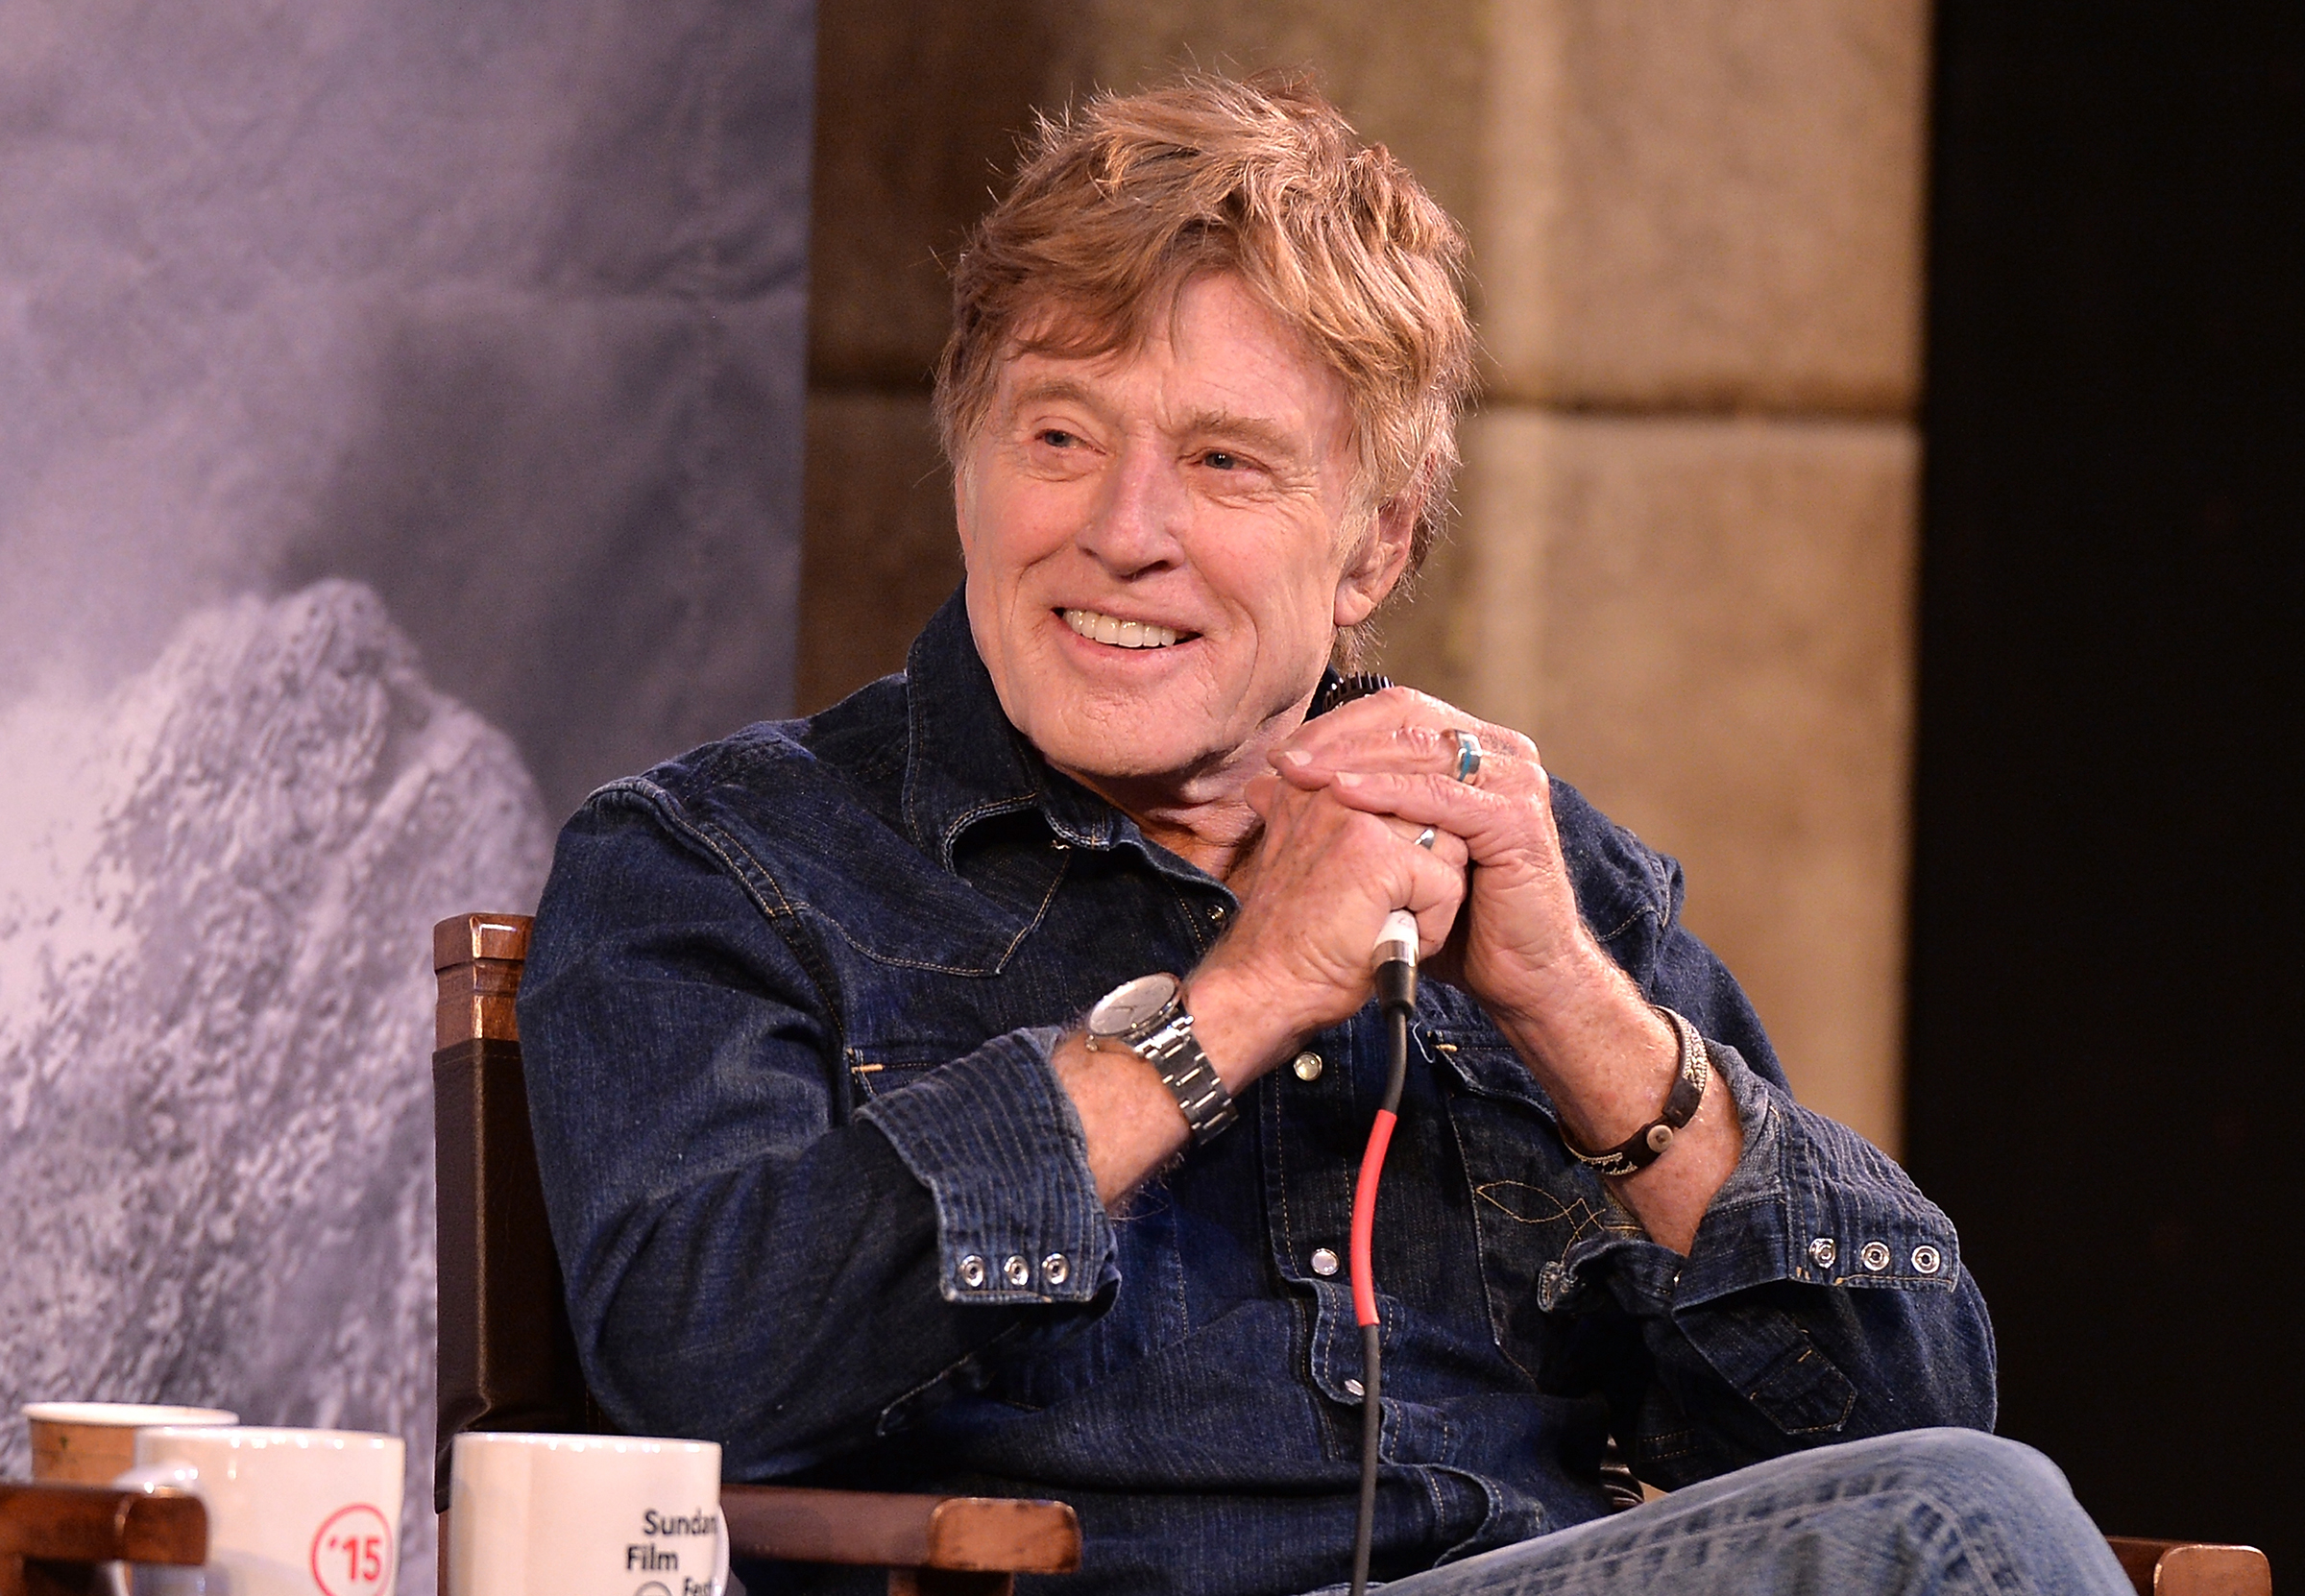 Robert Redford, Co-founder of The Redford Center